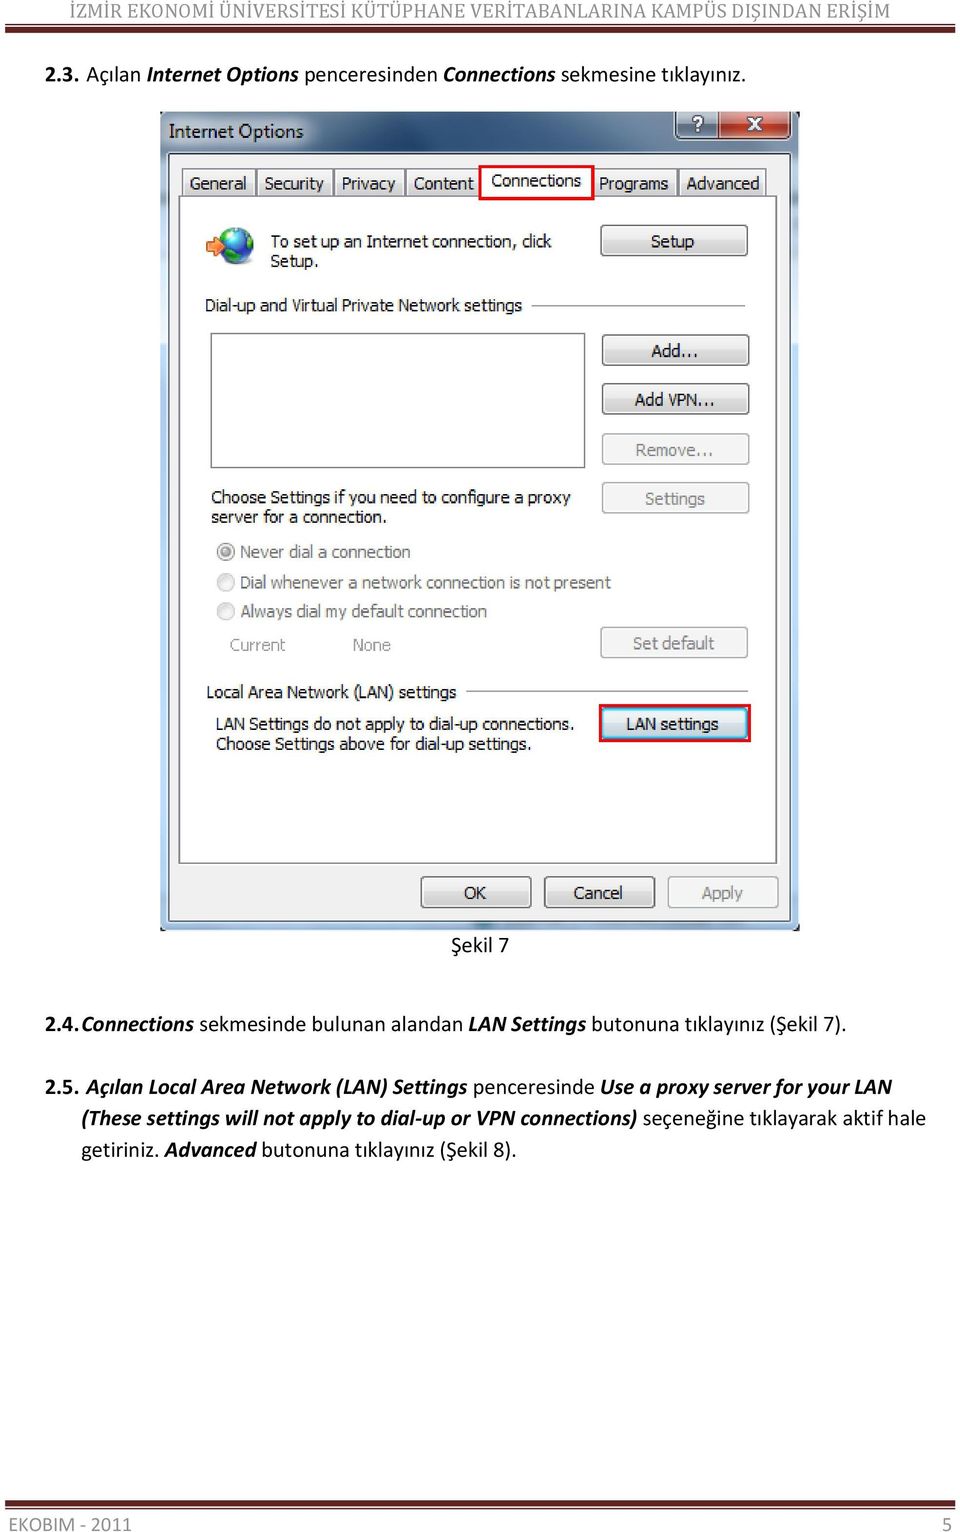 Açılan Local Area Network (LAN) Settings penceresinde Use a proxy server for your LAN (These settings will